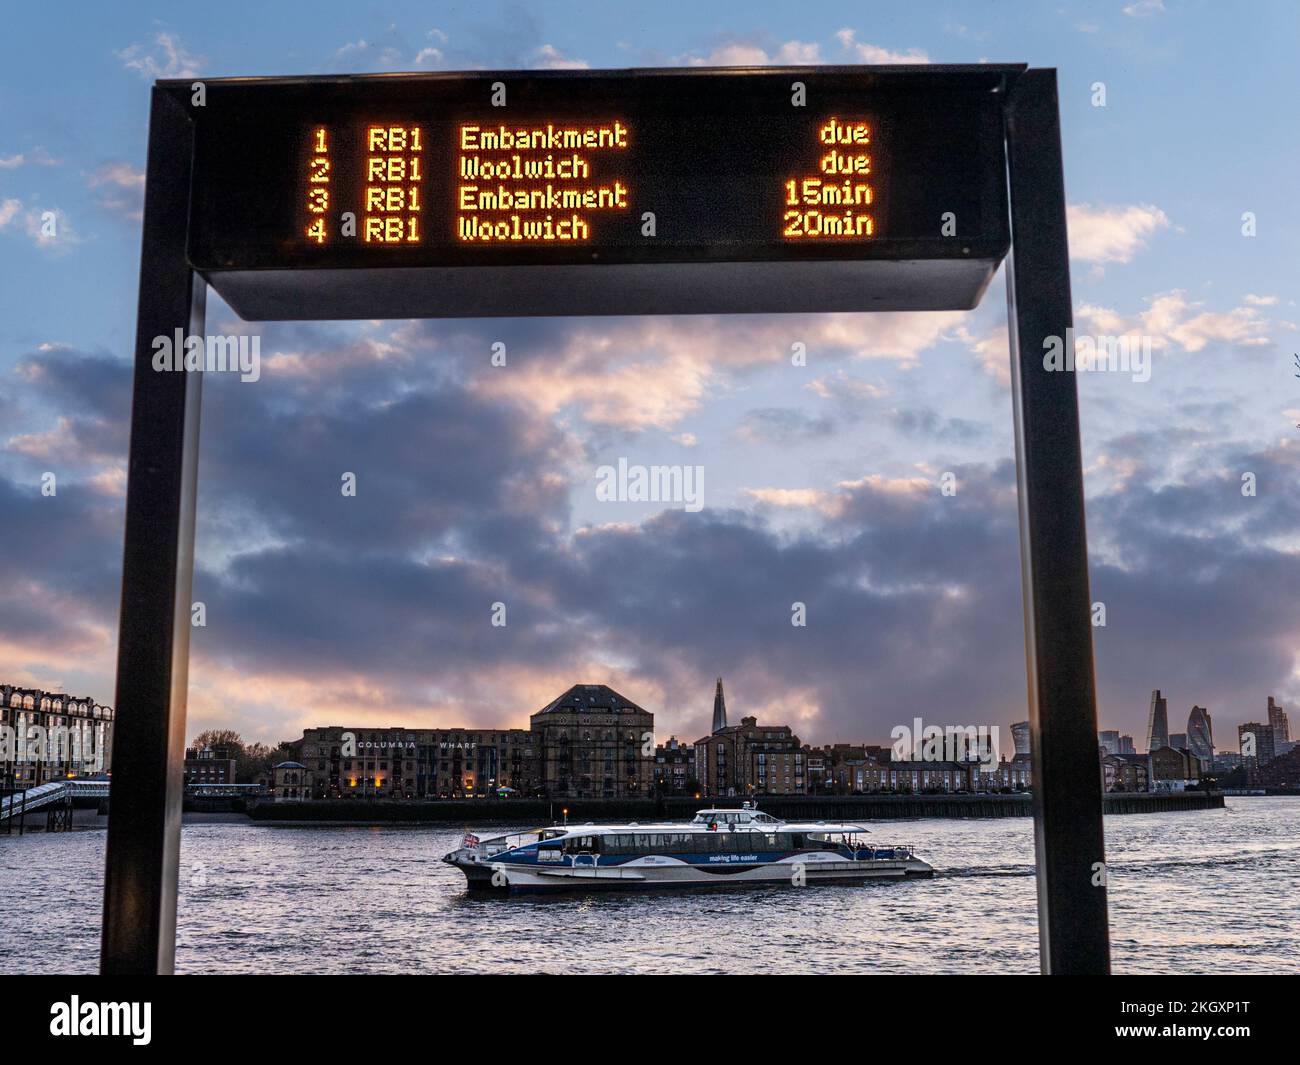 CANARY WHARF CLIPPER RIVER BOAT RB1 Digital arrivals information screen and RB1 Thames Clipper River boat arriving at sunset arriving at Canary Wharf London UK with City of London including The Shard behind. Stock Photo